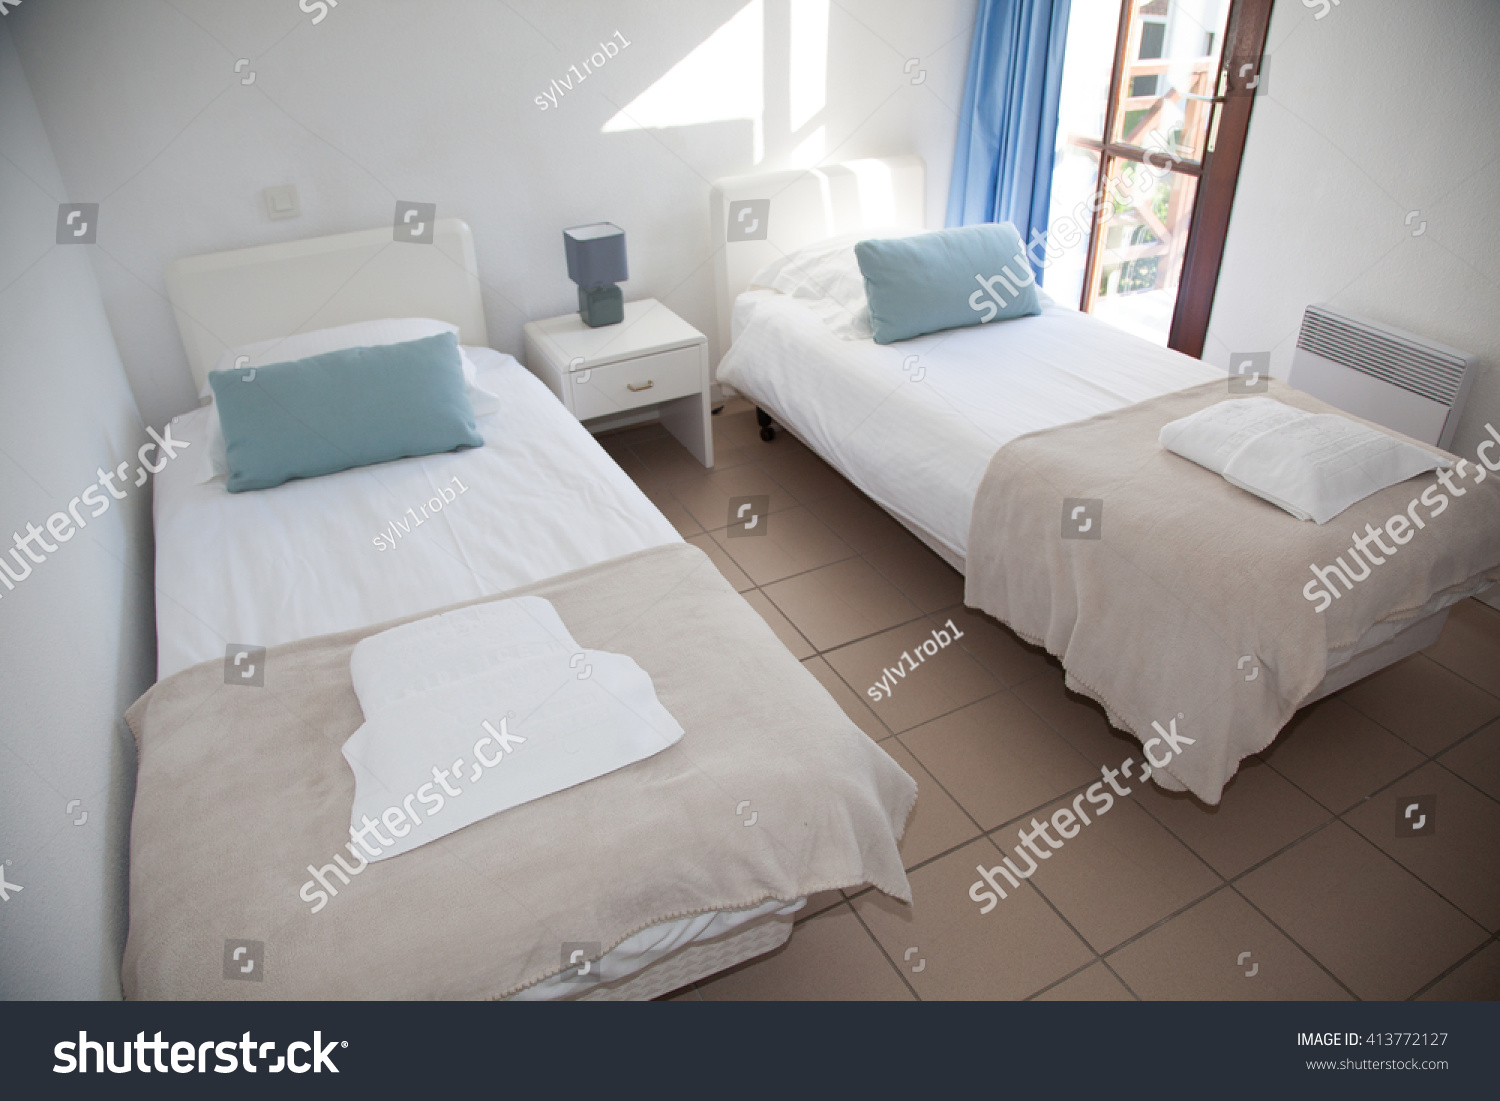 Two Single Beds Images Stock Photos Vectors Shutterstock